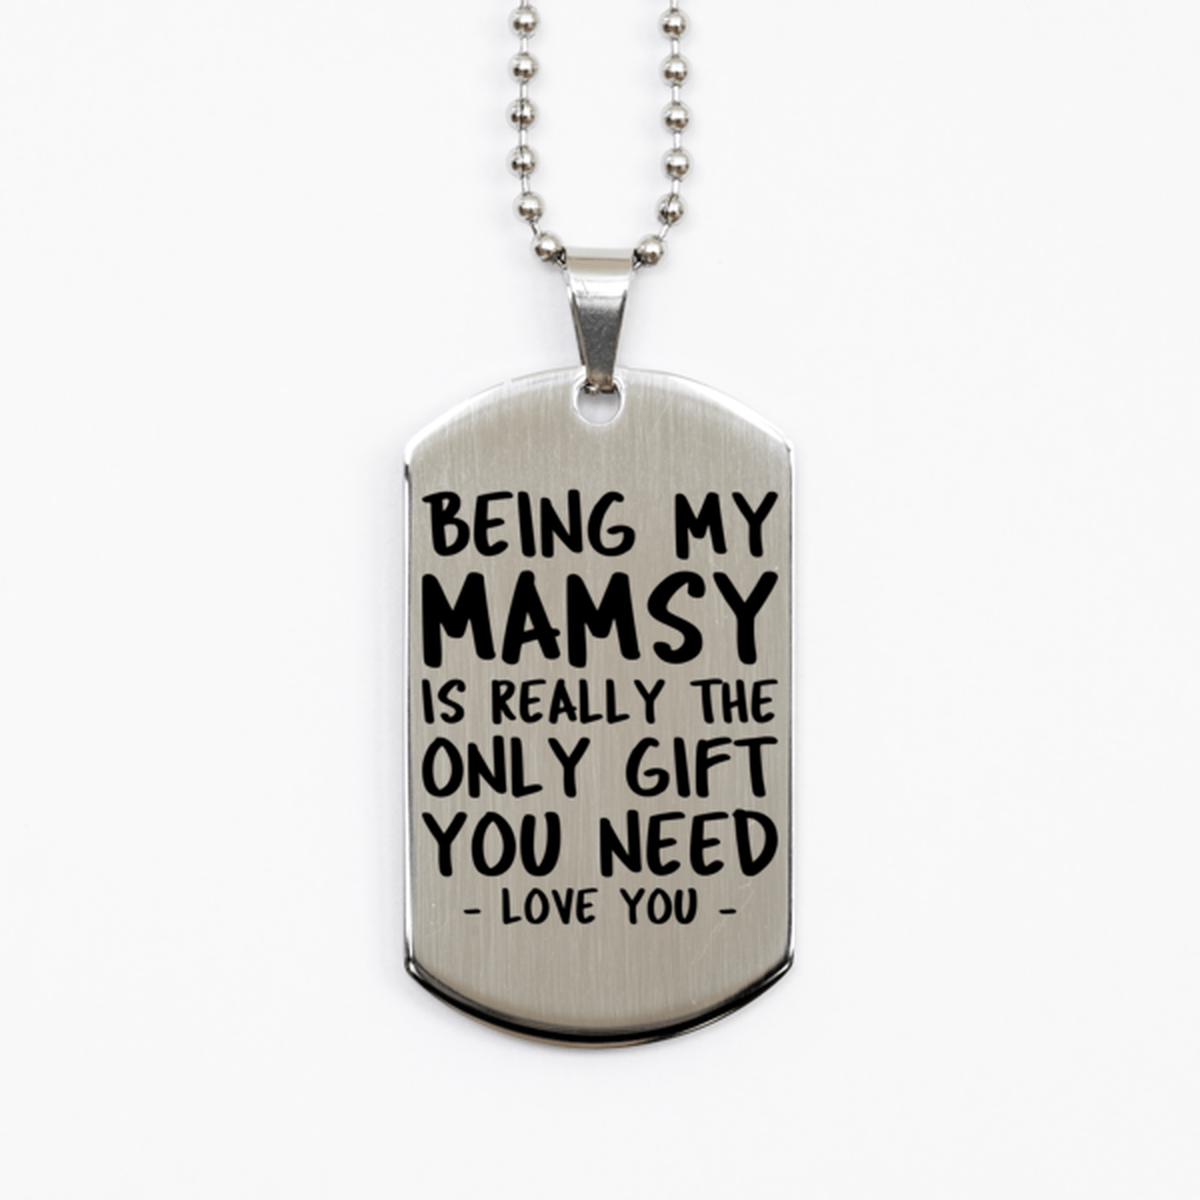 Funny Mamsy Silver Dog Tag Necklace, Being My Mamsy Is Really the Only Gift You Need, Best Birthday Gifts for Mamsy